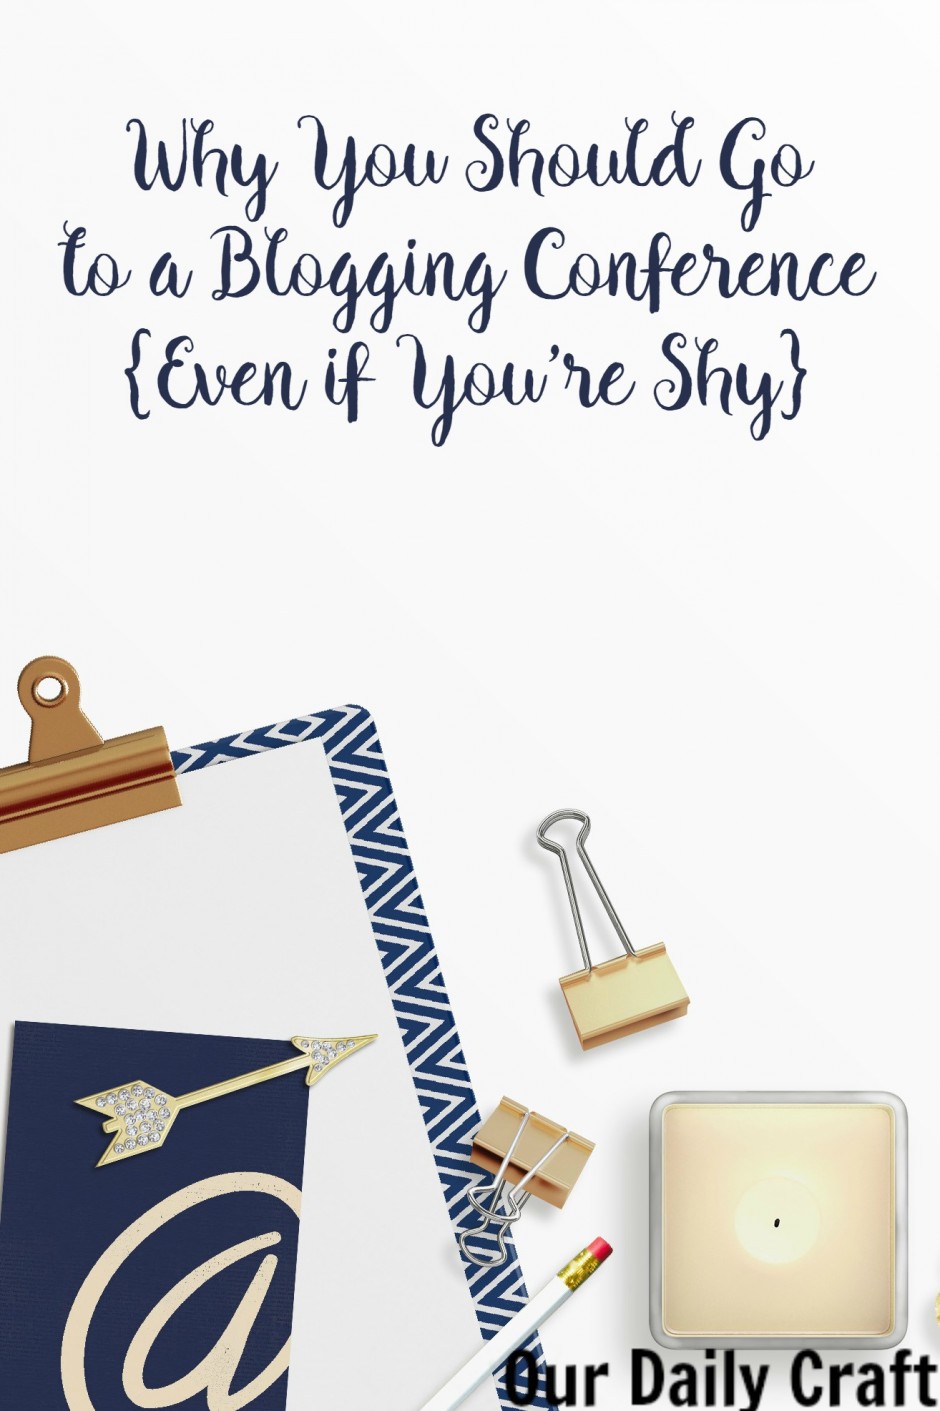 Why you should go to a blogging conference even if you're shy.